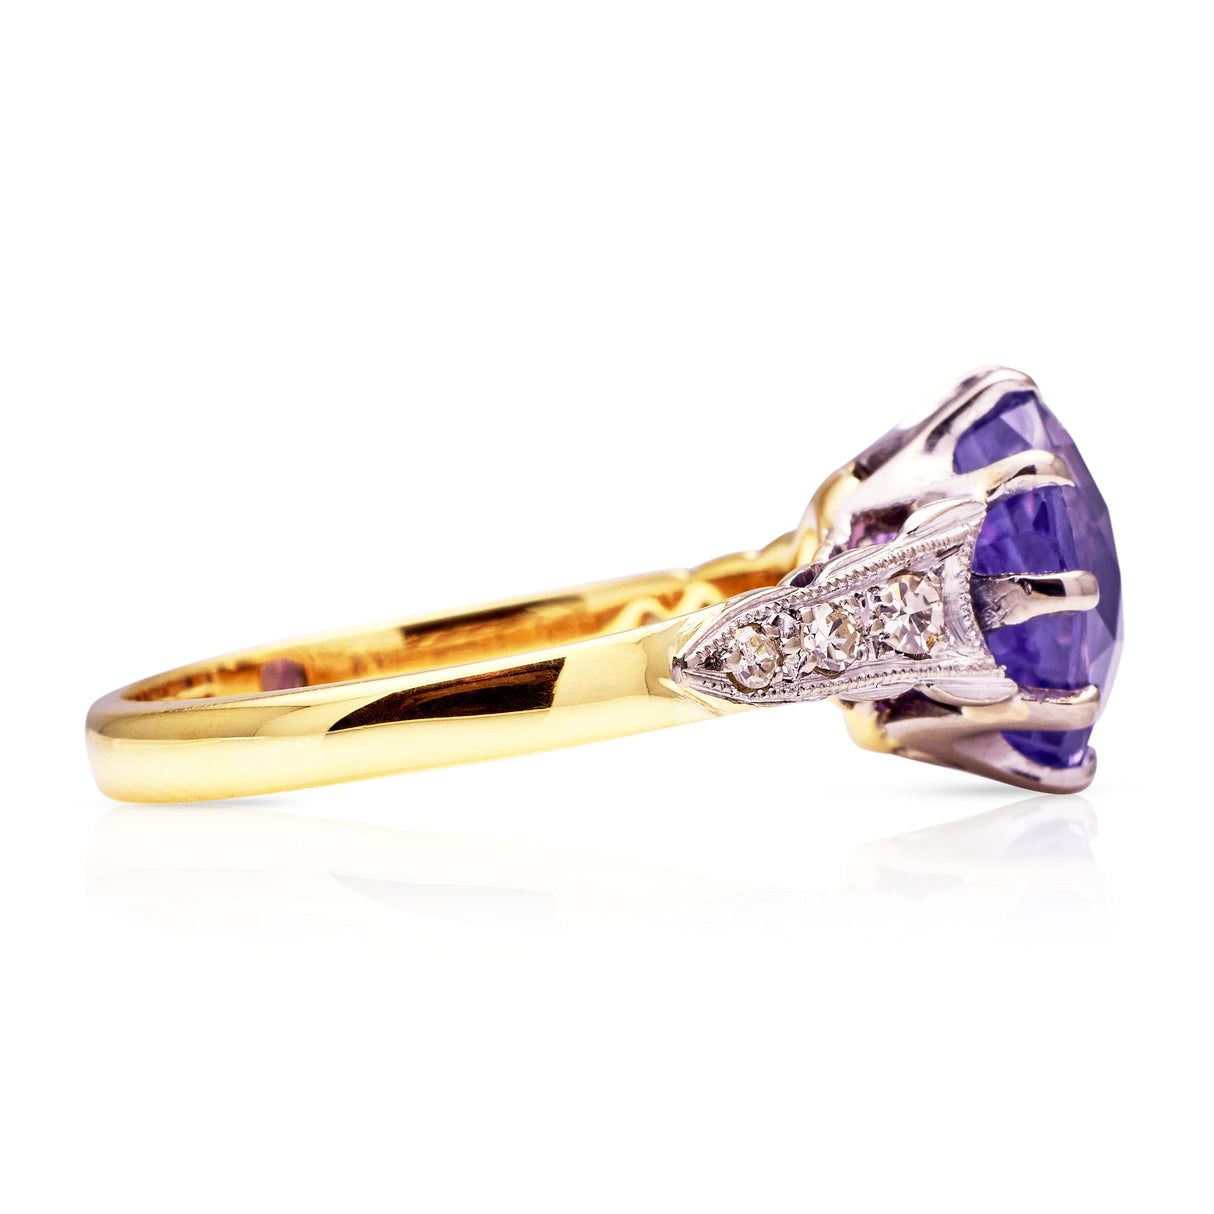 Purple sapphire engagement ring, side view.